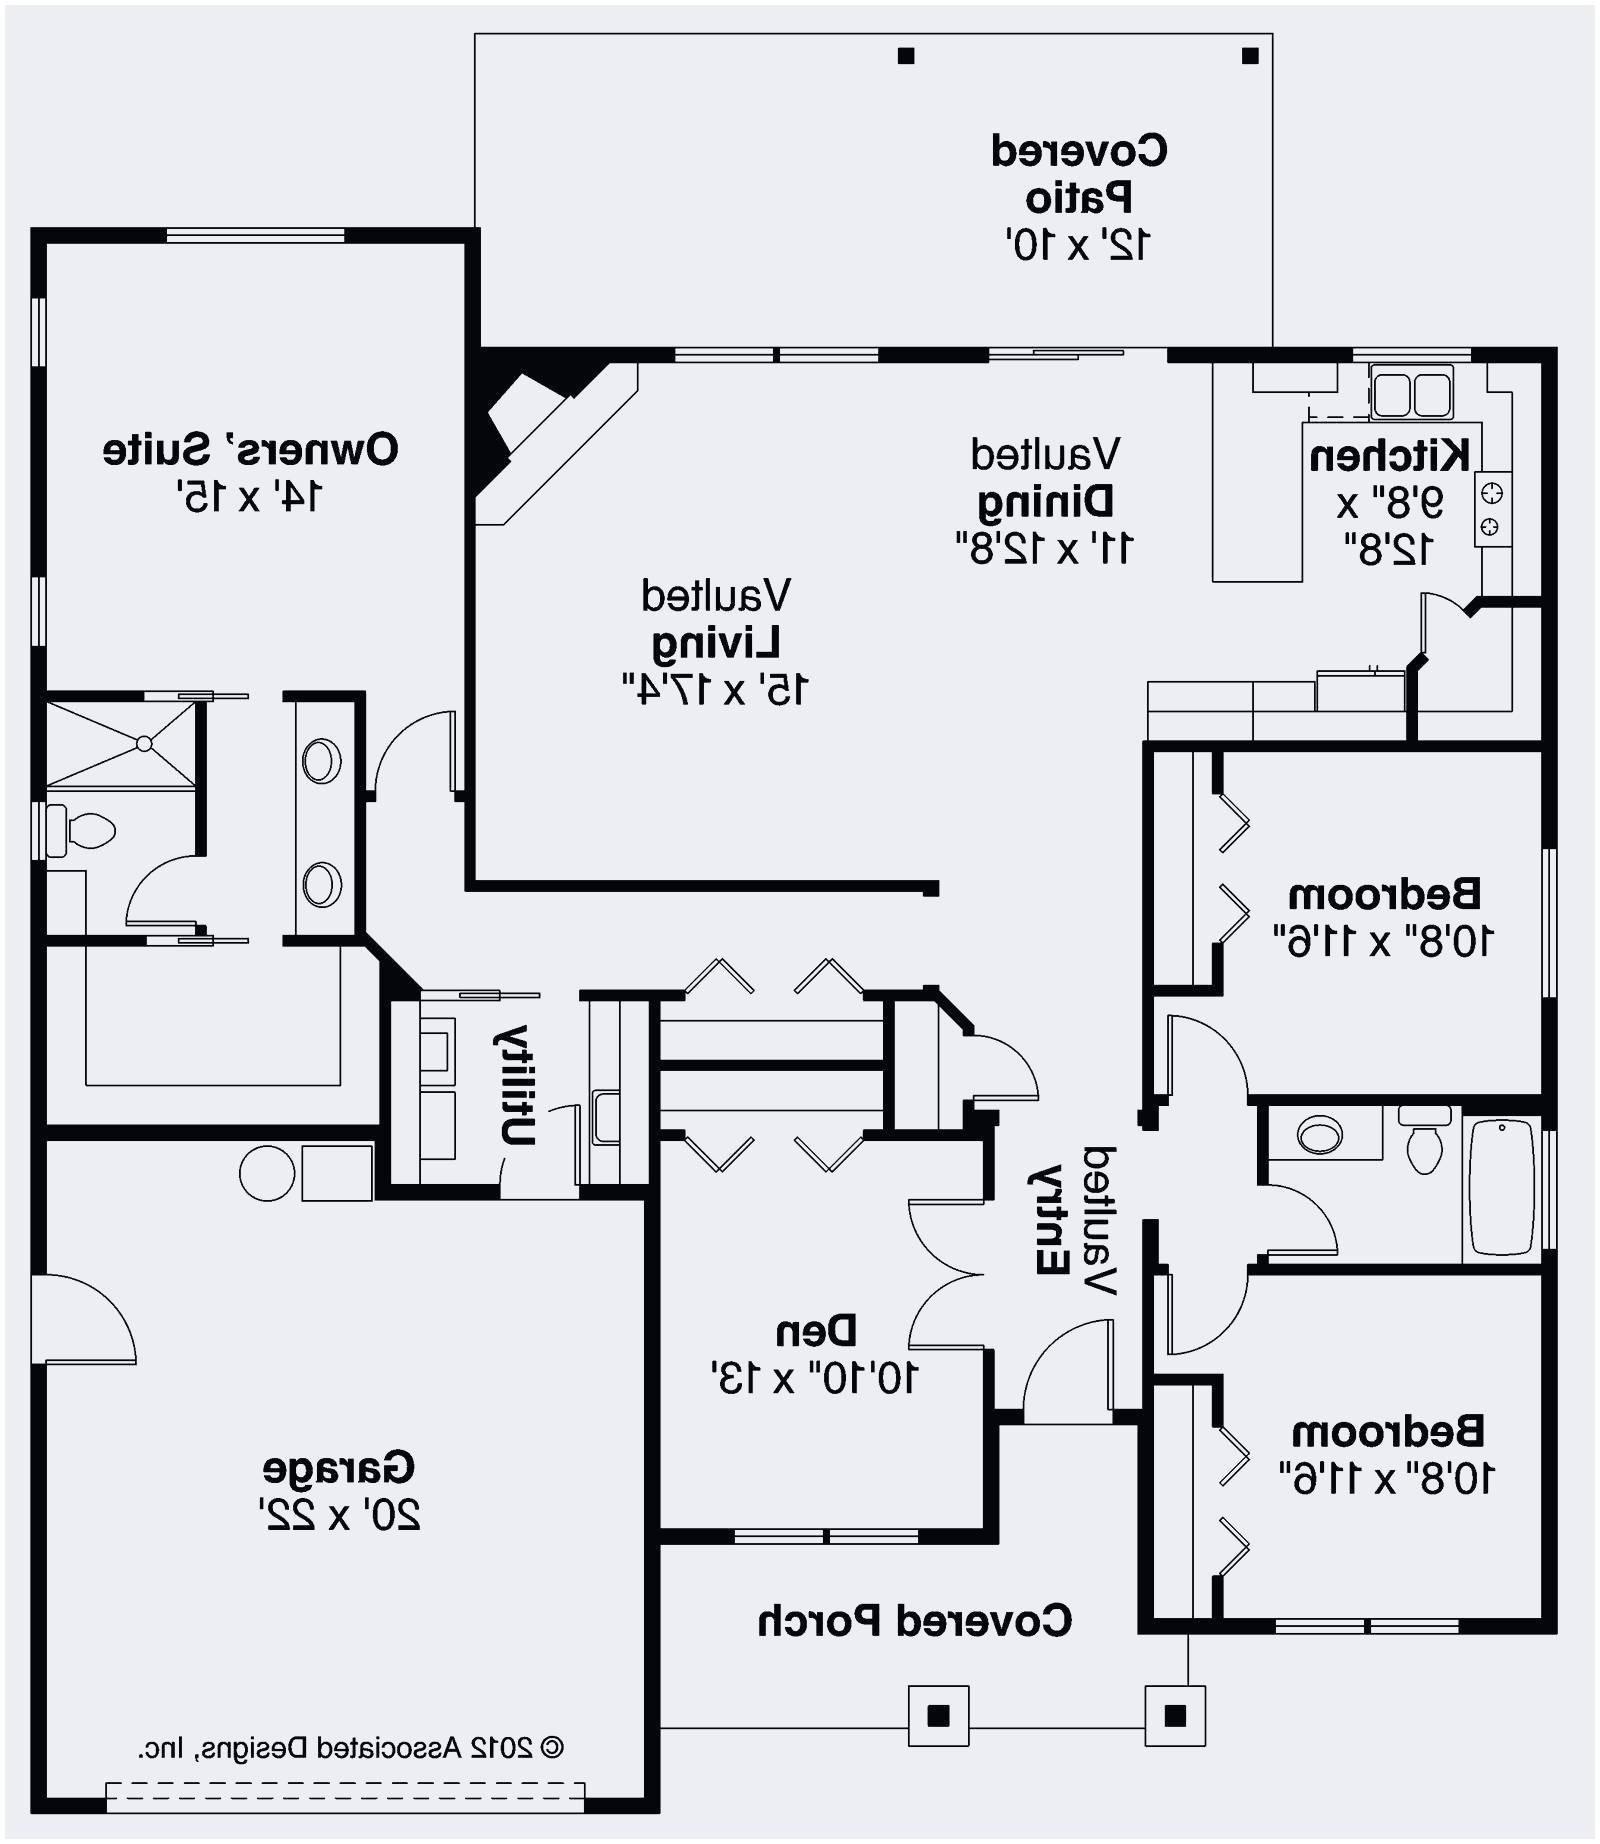 Wiring Diagram For House Lights Fresh House Wiring Diagram Electrical Floor Plan 2004 2010 Bmw X3